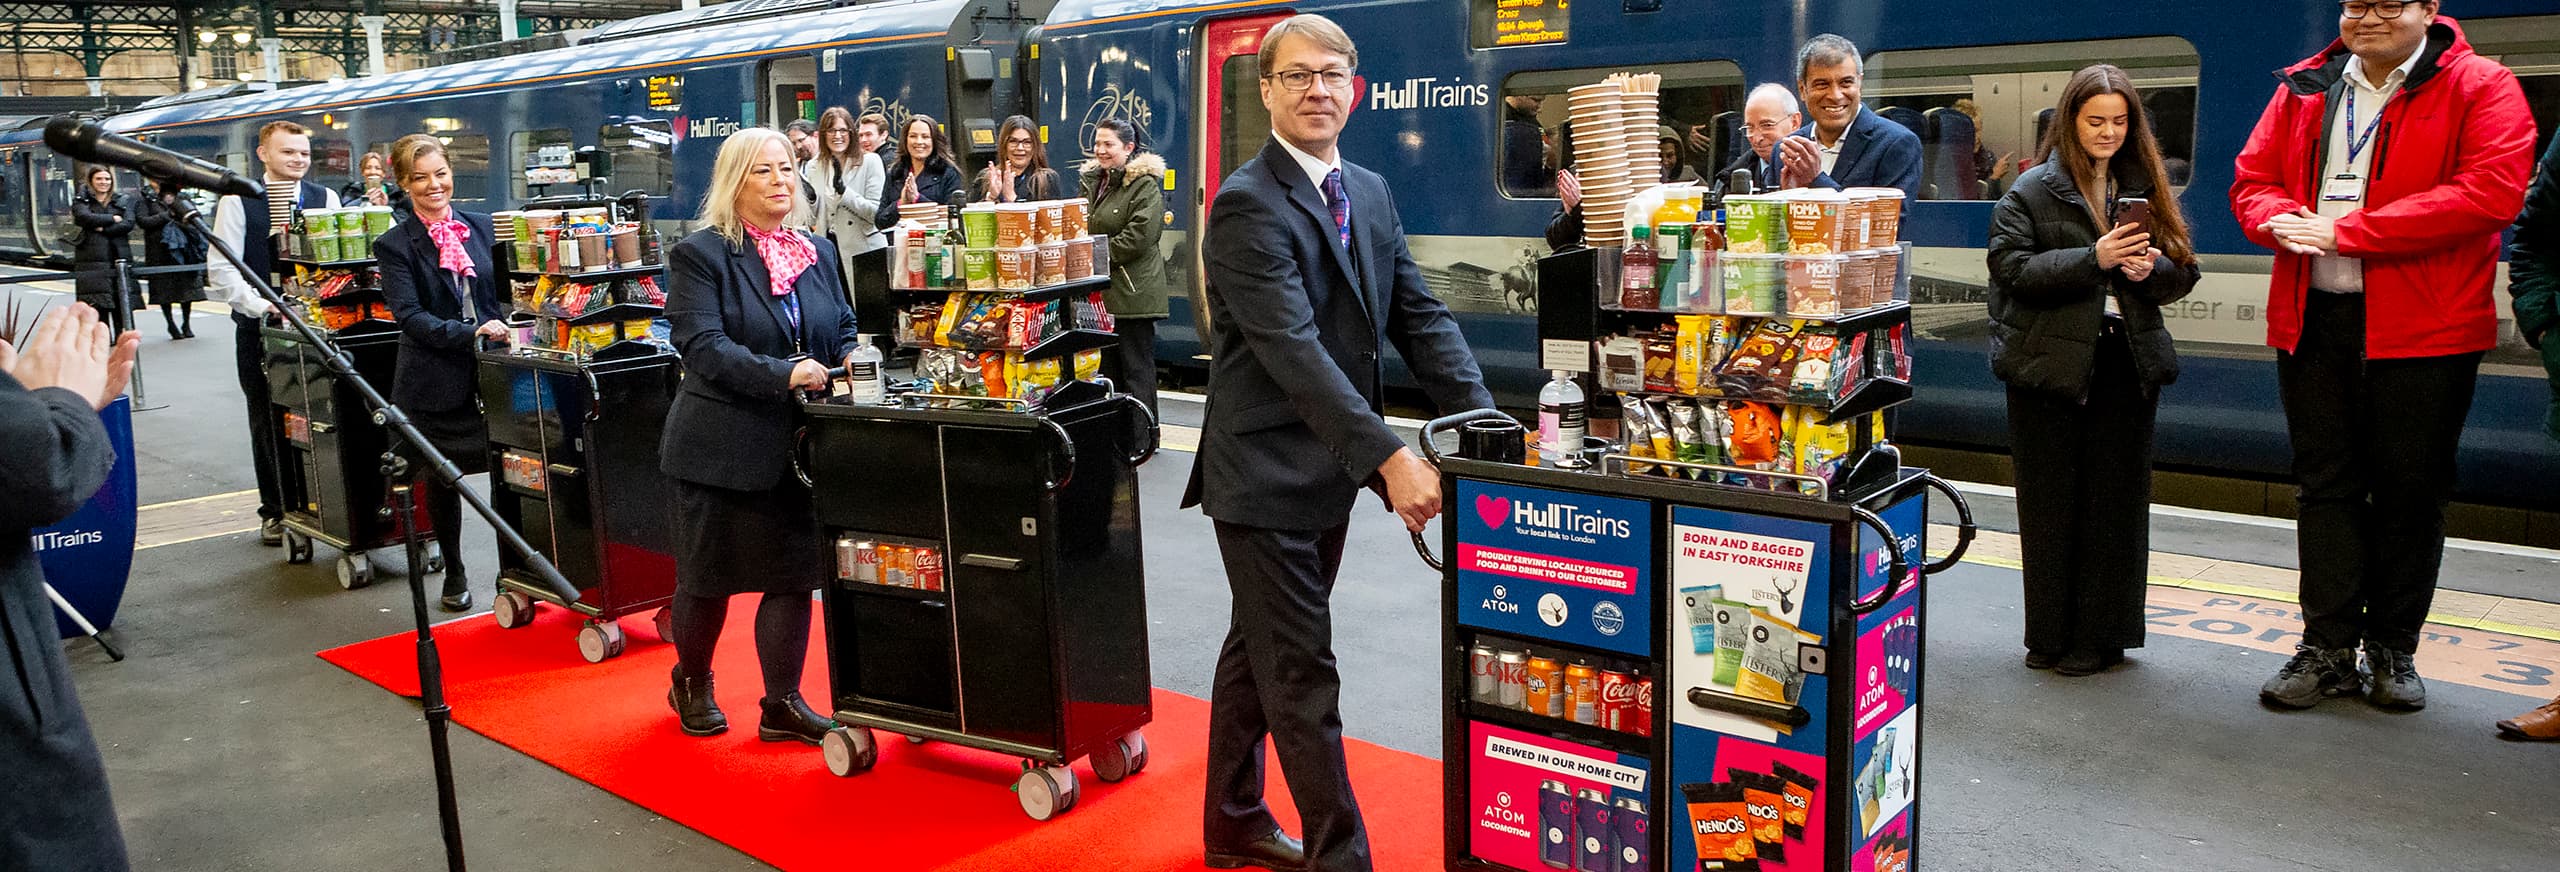 Hull Trains launches Standard Class food and drink onboard services